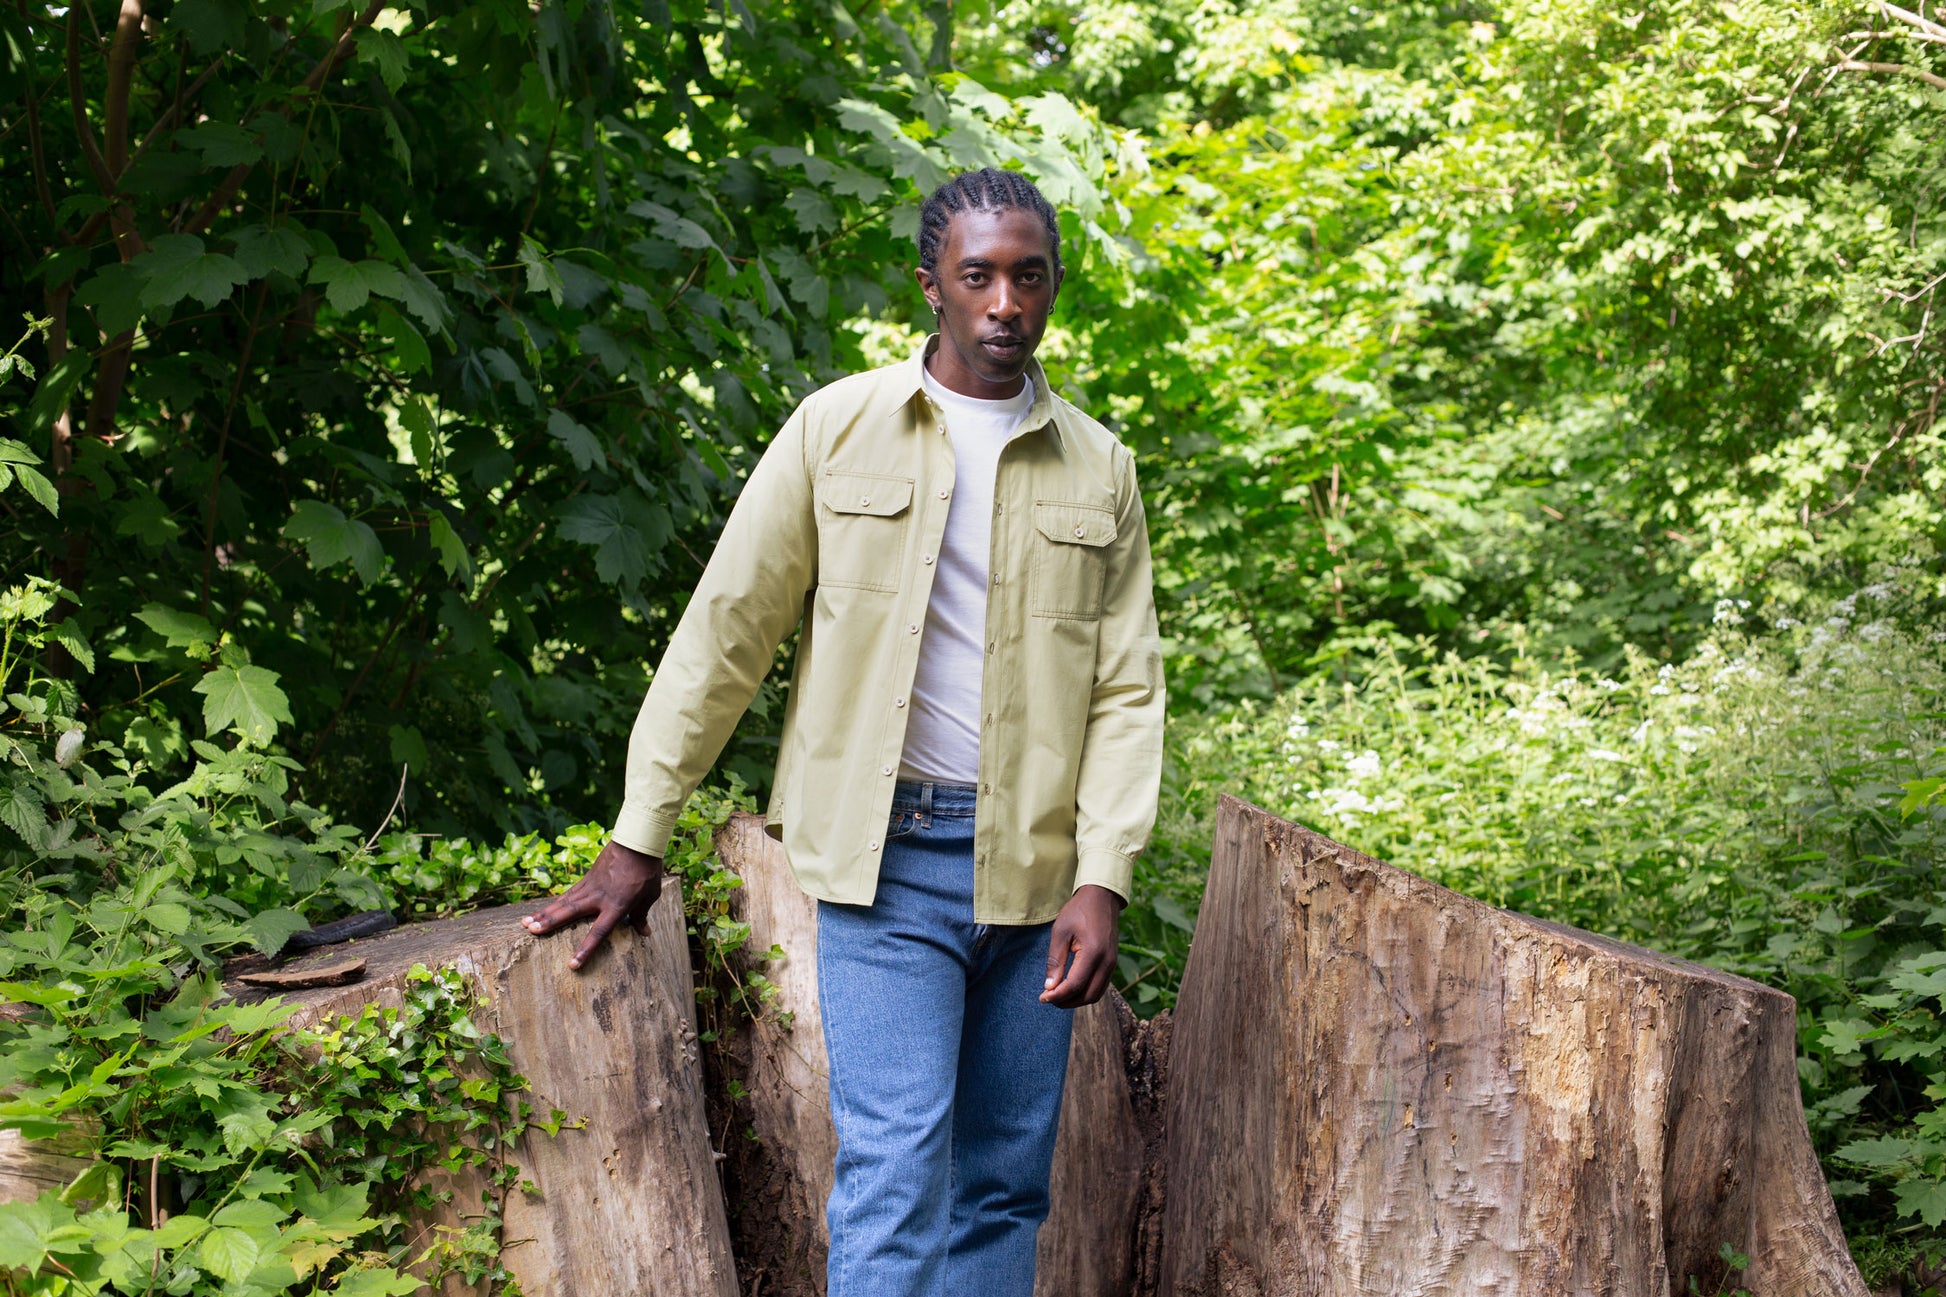 Model stands in front of several large tree stumps, with one hand rested on a stump, surrounded by greenery. He wears Saywood's Eddy Mens Khaki Shirt with utility pockets, worn open with a white t-shirt underneath. Worn with jeans.